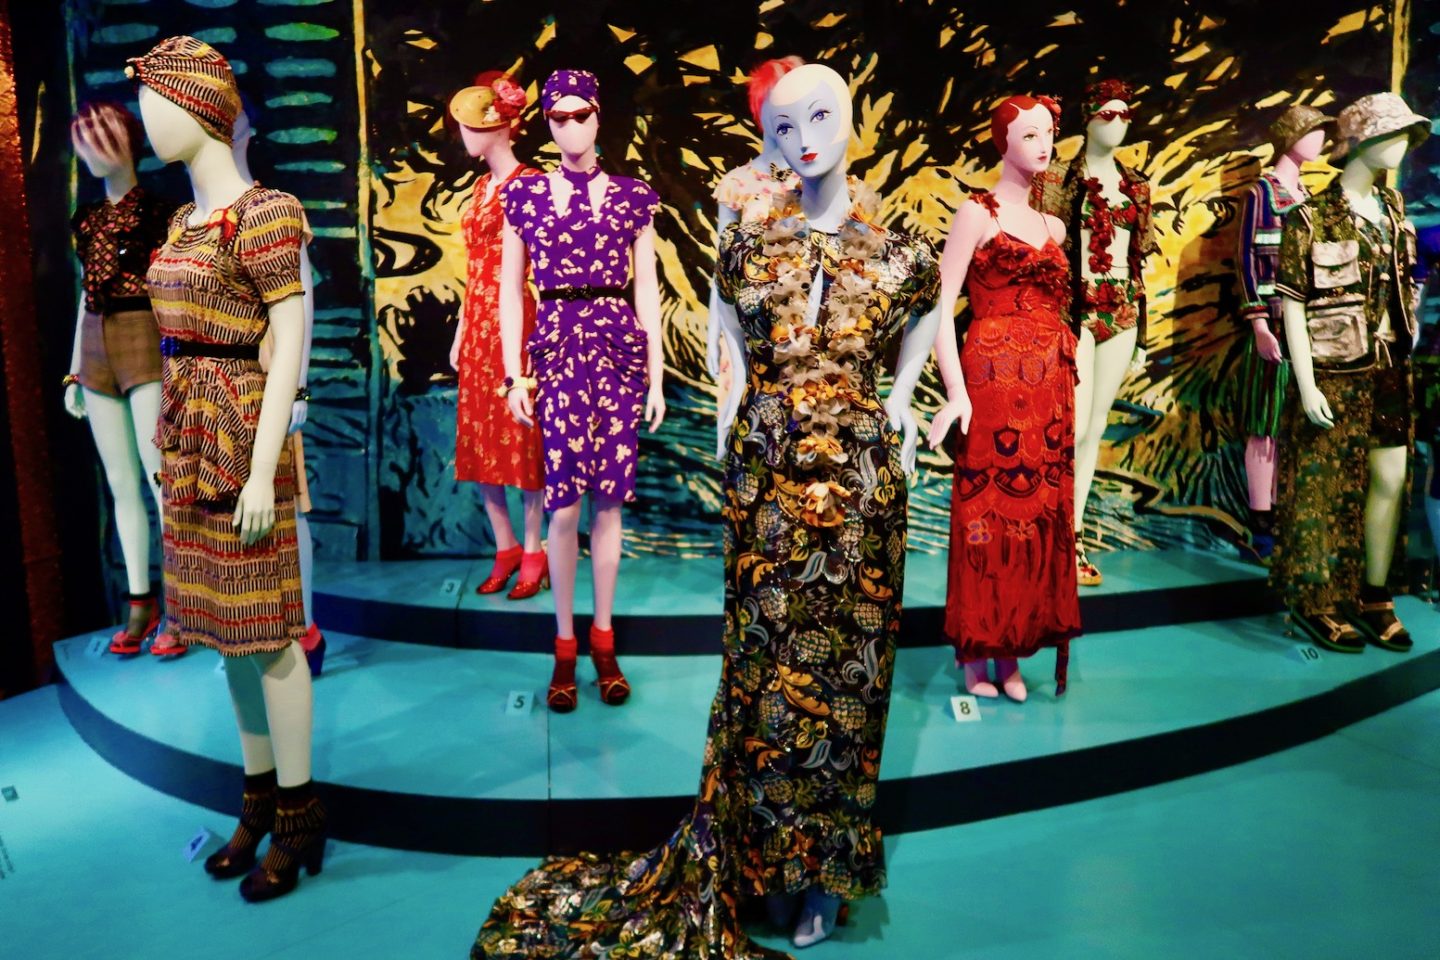 “The World of Anna Sui” at The Museum of Art and Design